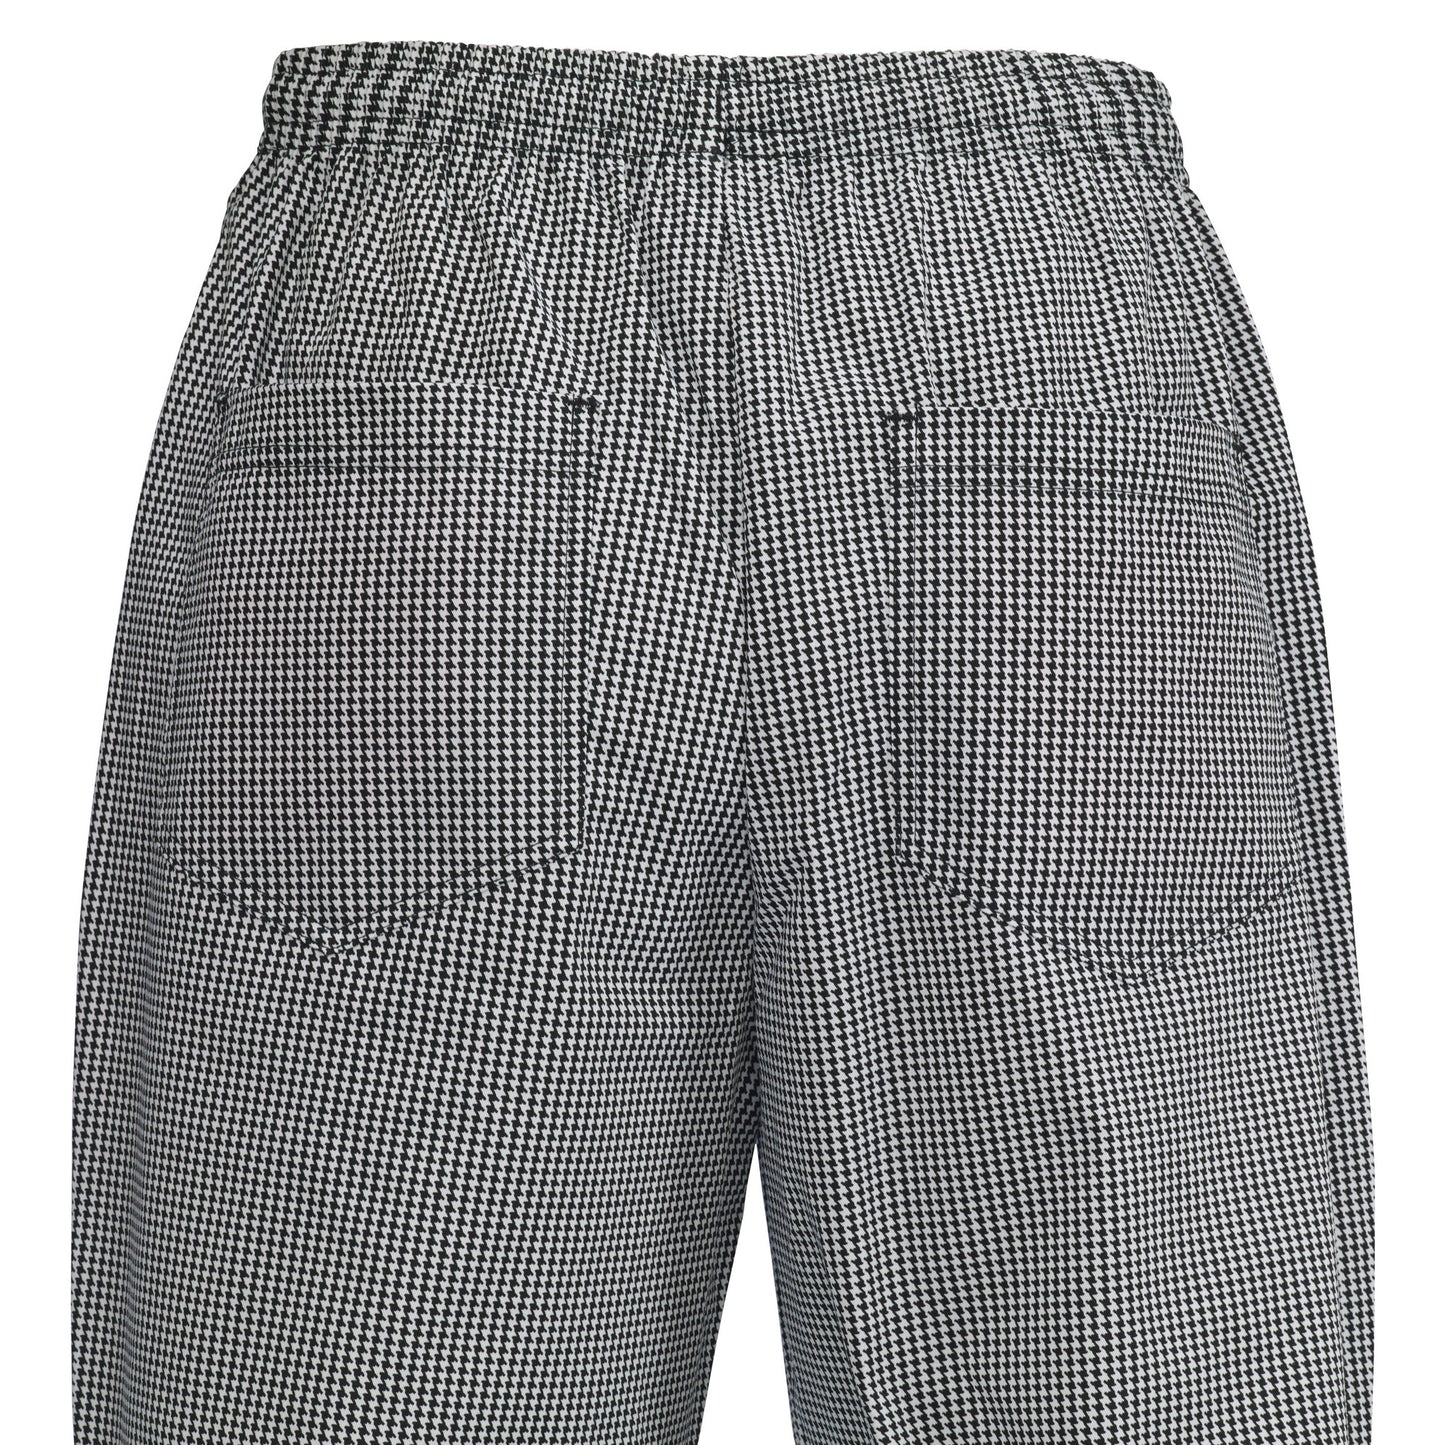 Chef Pants, Houndstooth - X-Large